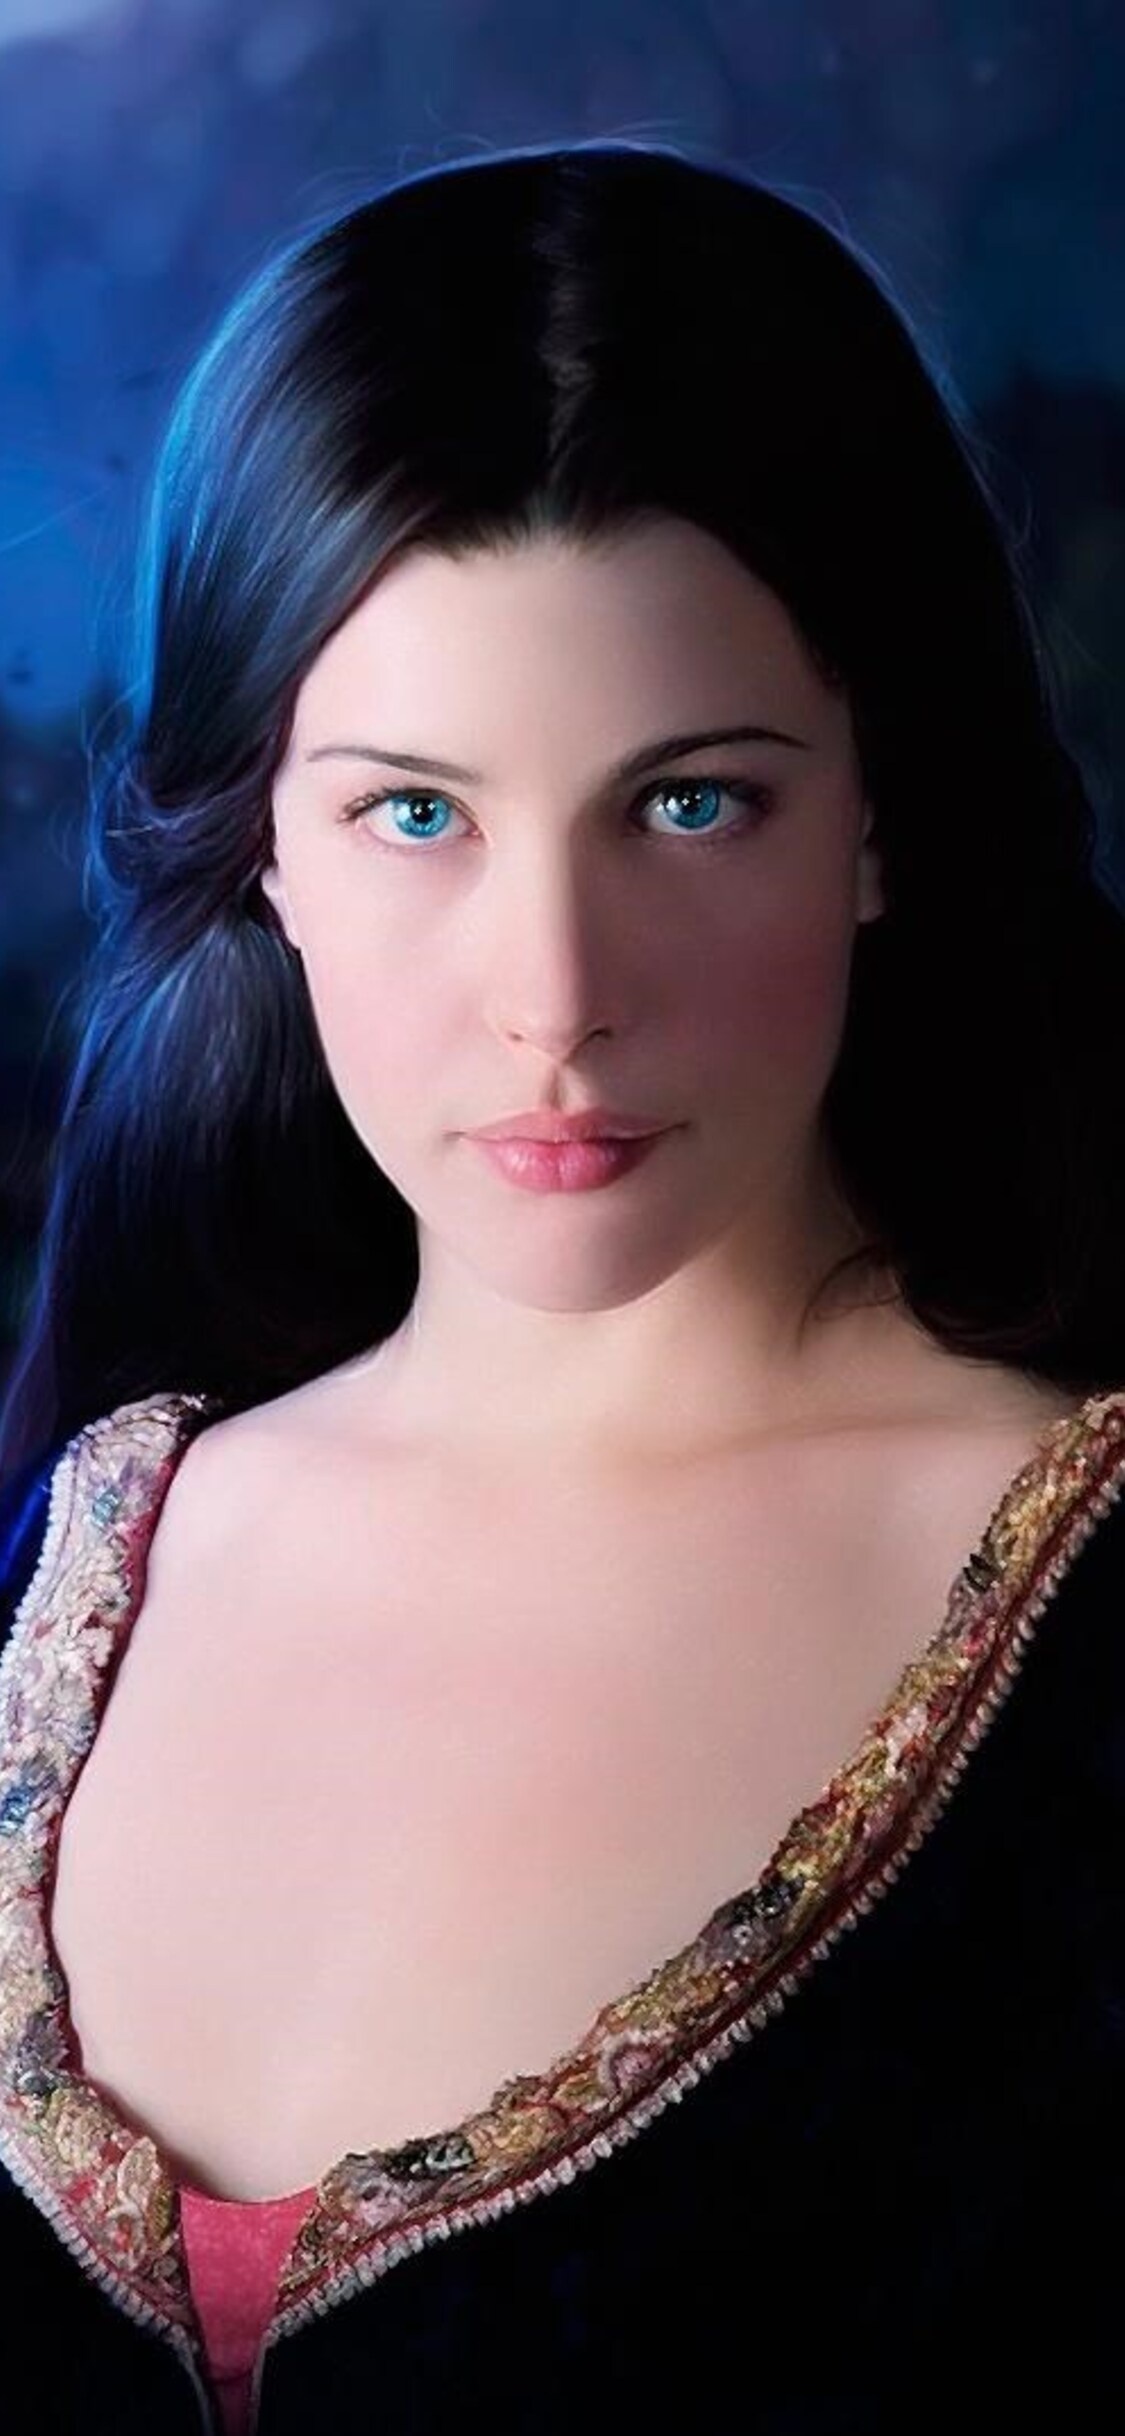 Liv Tyler as Arwen, Lord of the Rings, iPhone wallpaper, Beautiful and graceful, 1130x2440 HD Handy